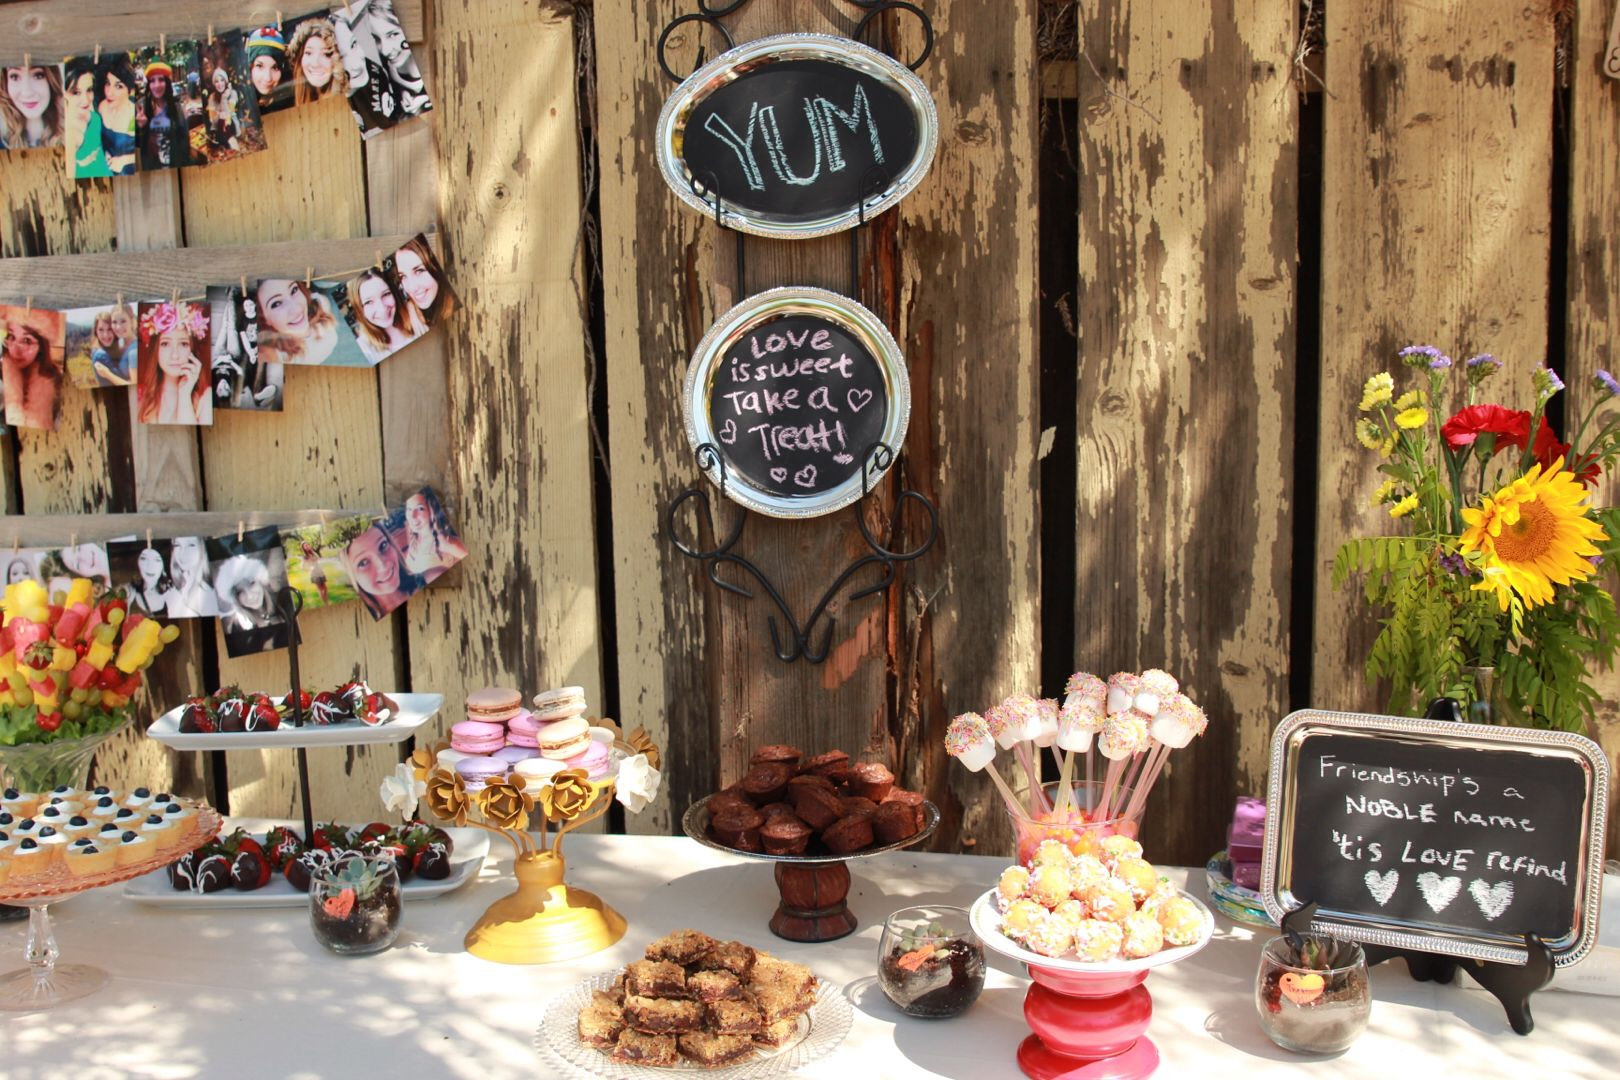 Backyard Birthday Party Ideas Sweet 16
 Perfect for a rustic and vintage sweet 16